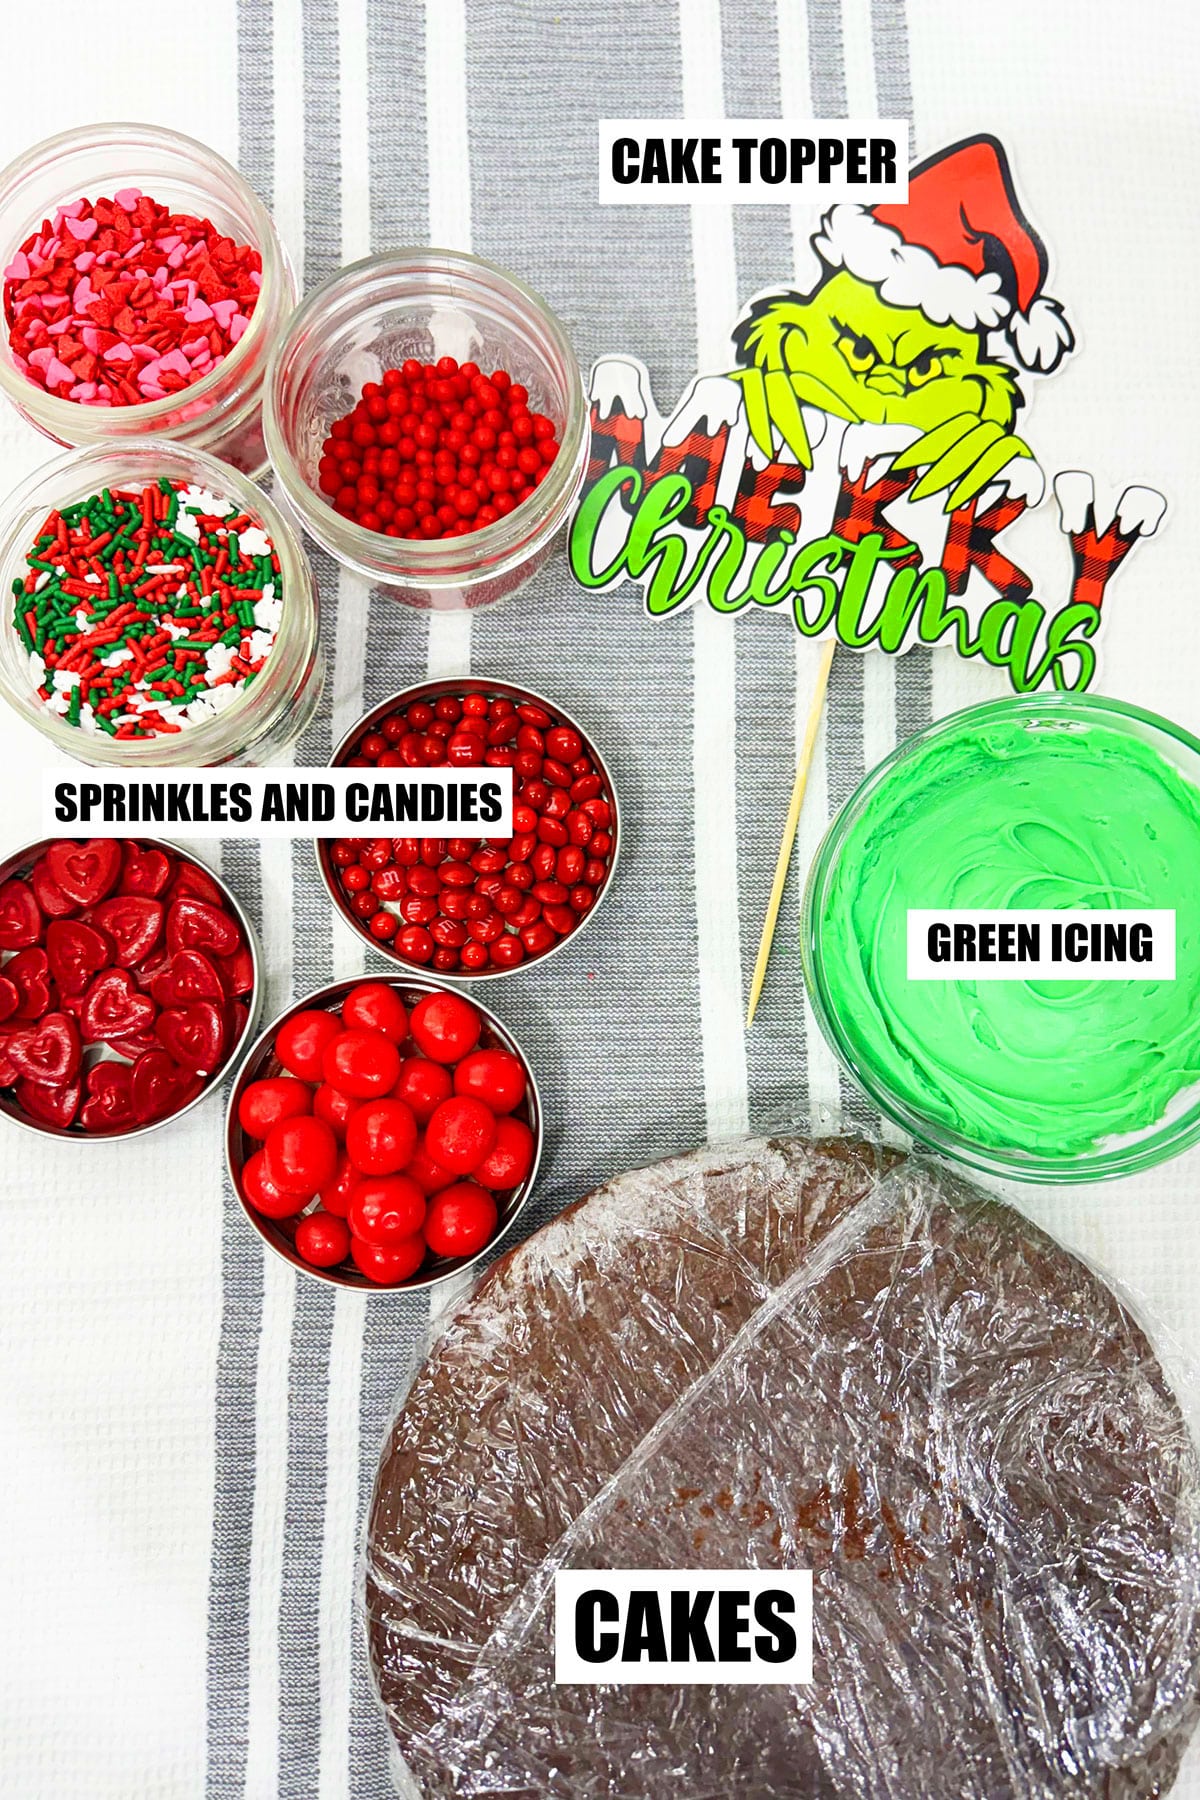 Ingredients For Christmas Cake on Patterned Cloth. 